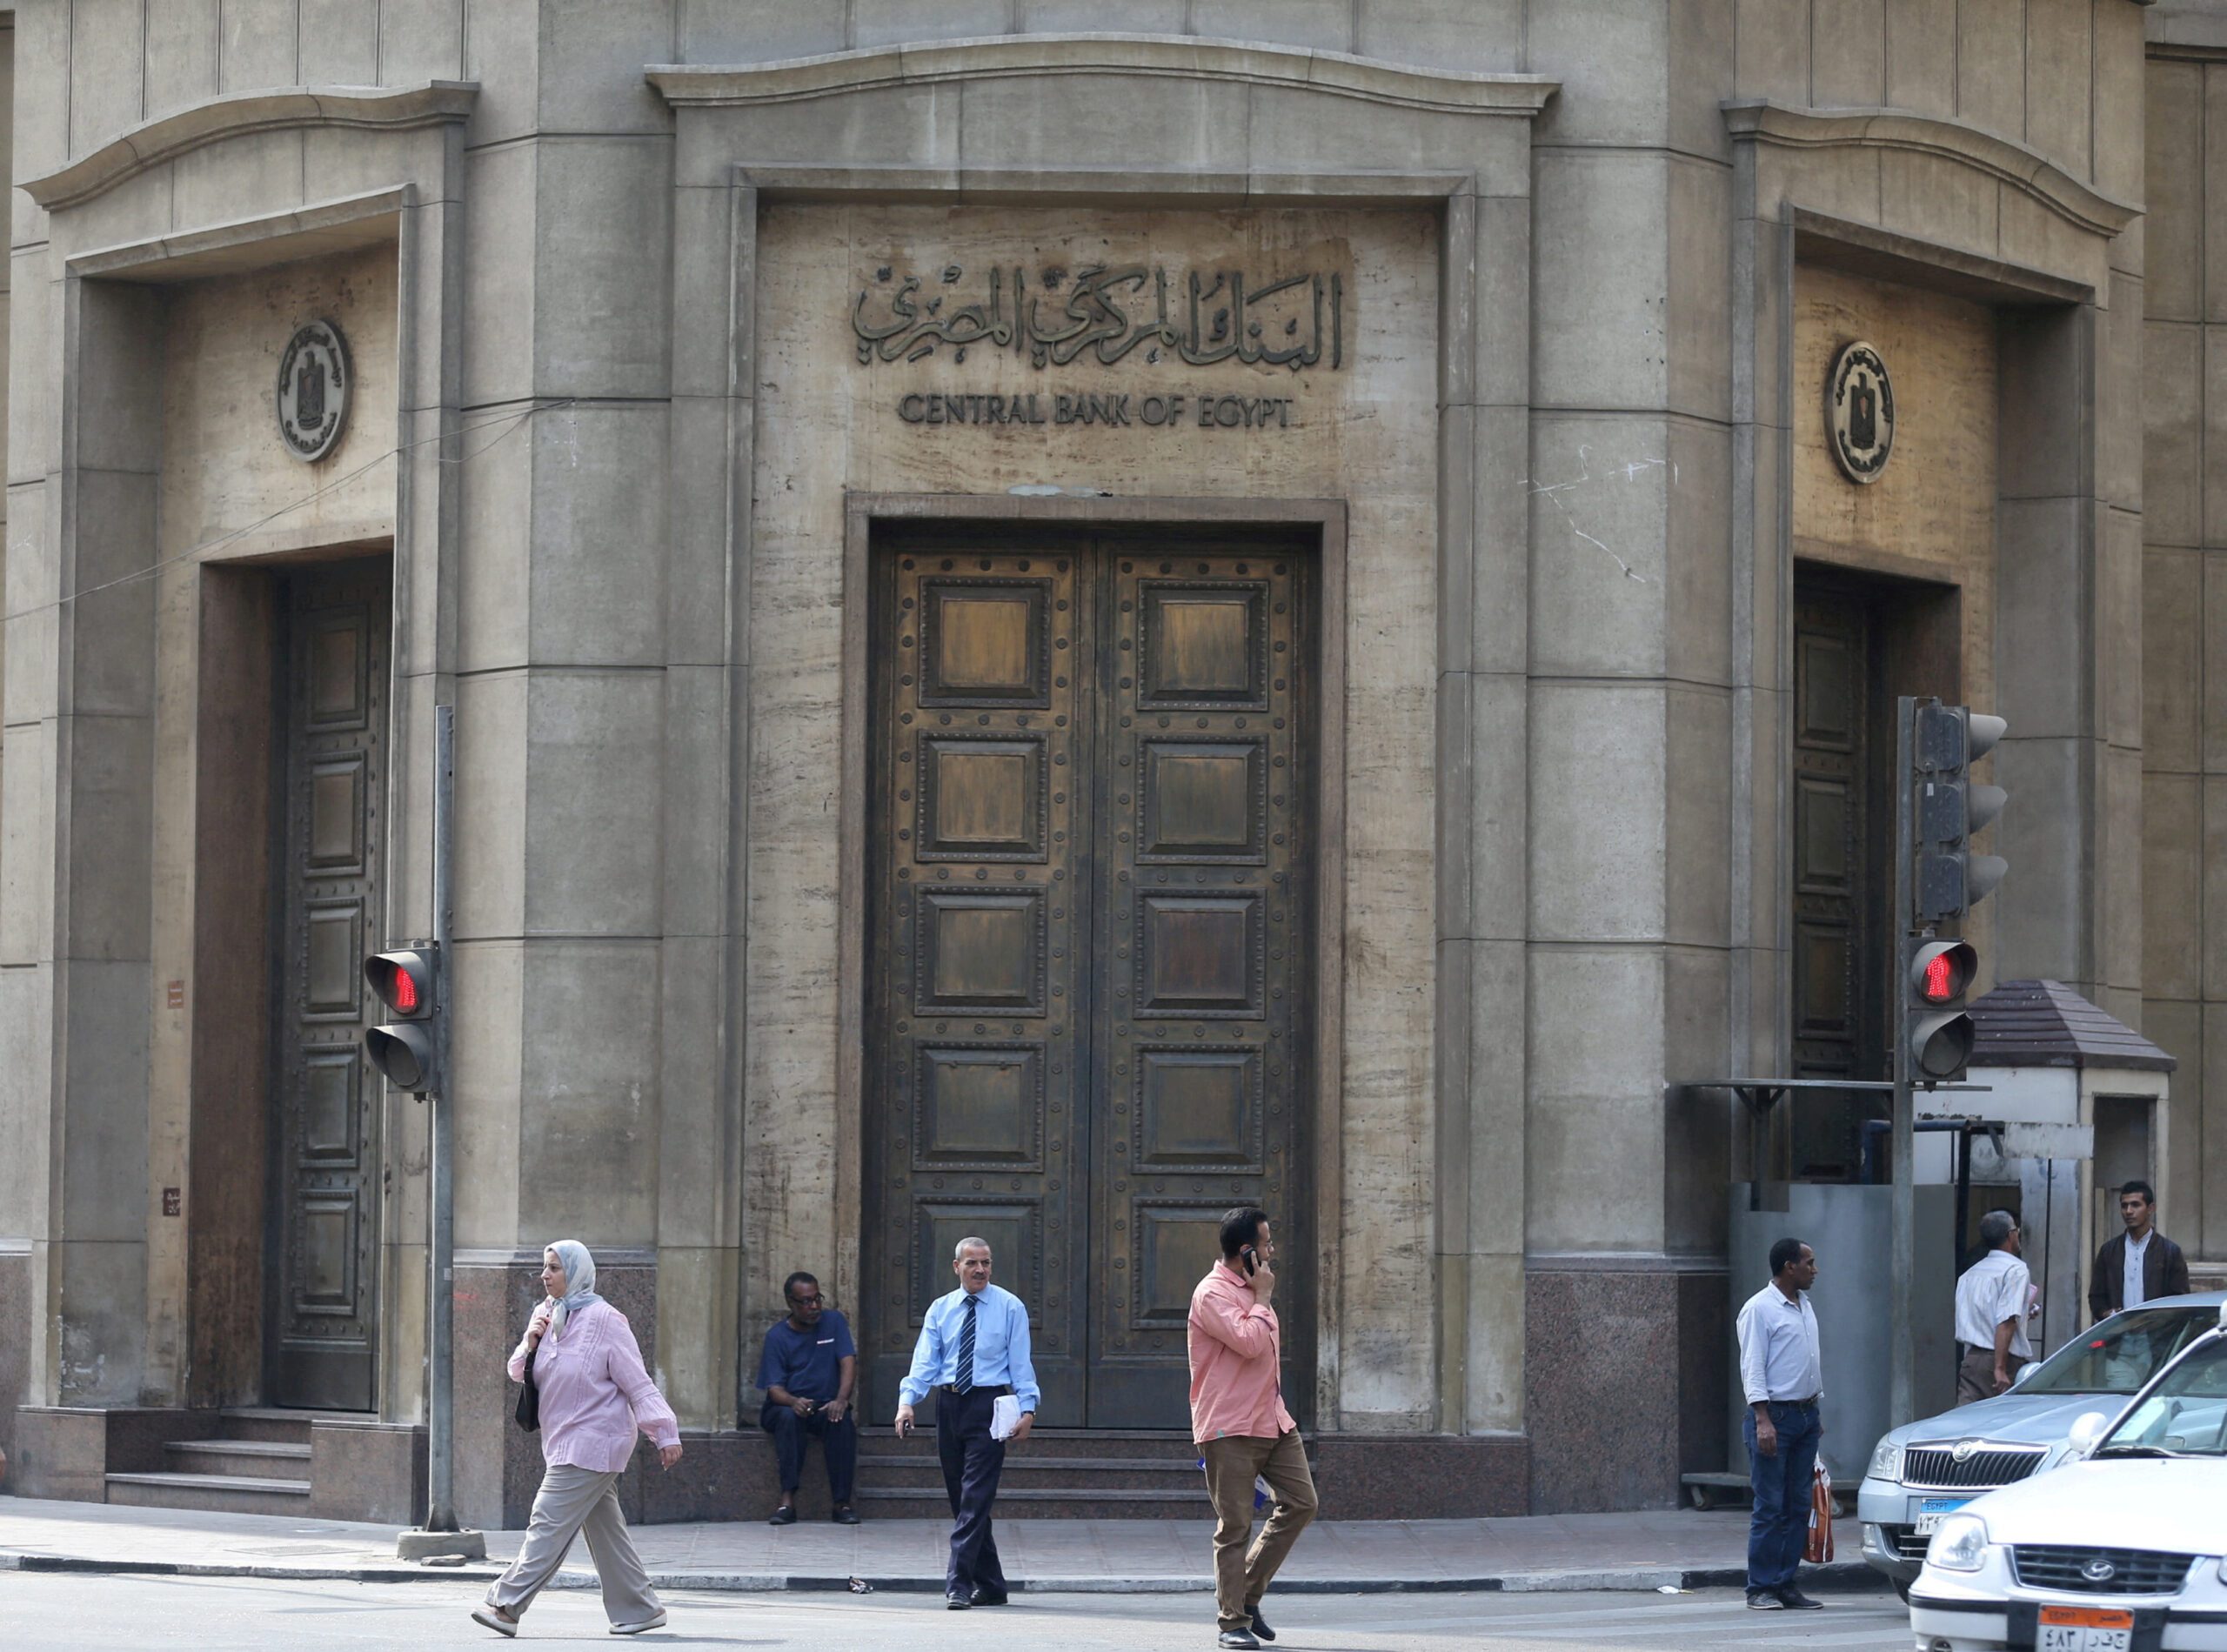 Central Bank of Egypt's headquarters in Cairo